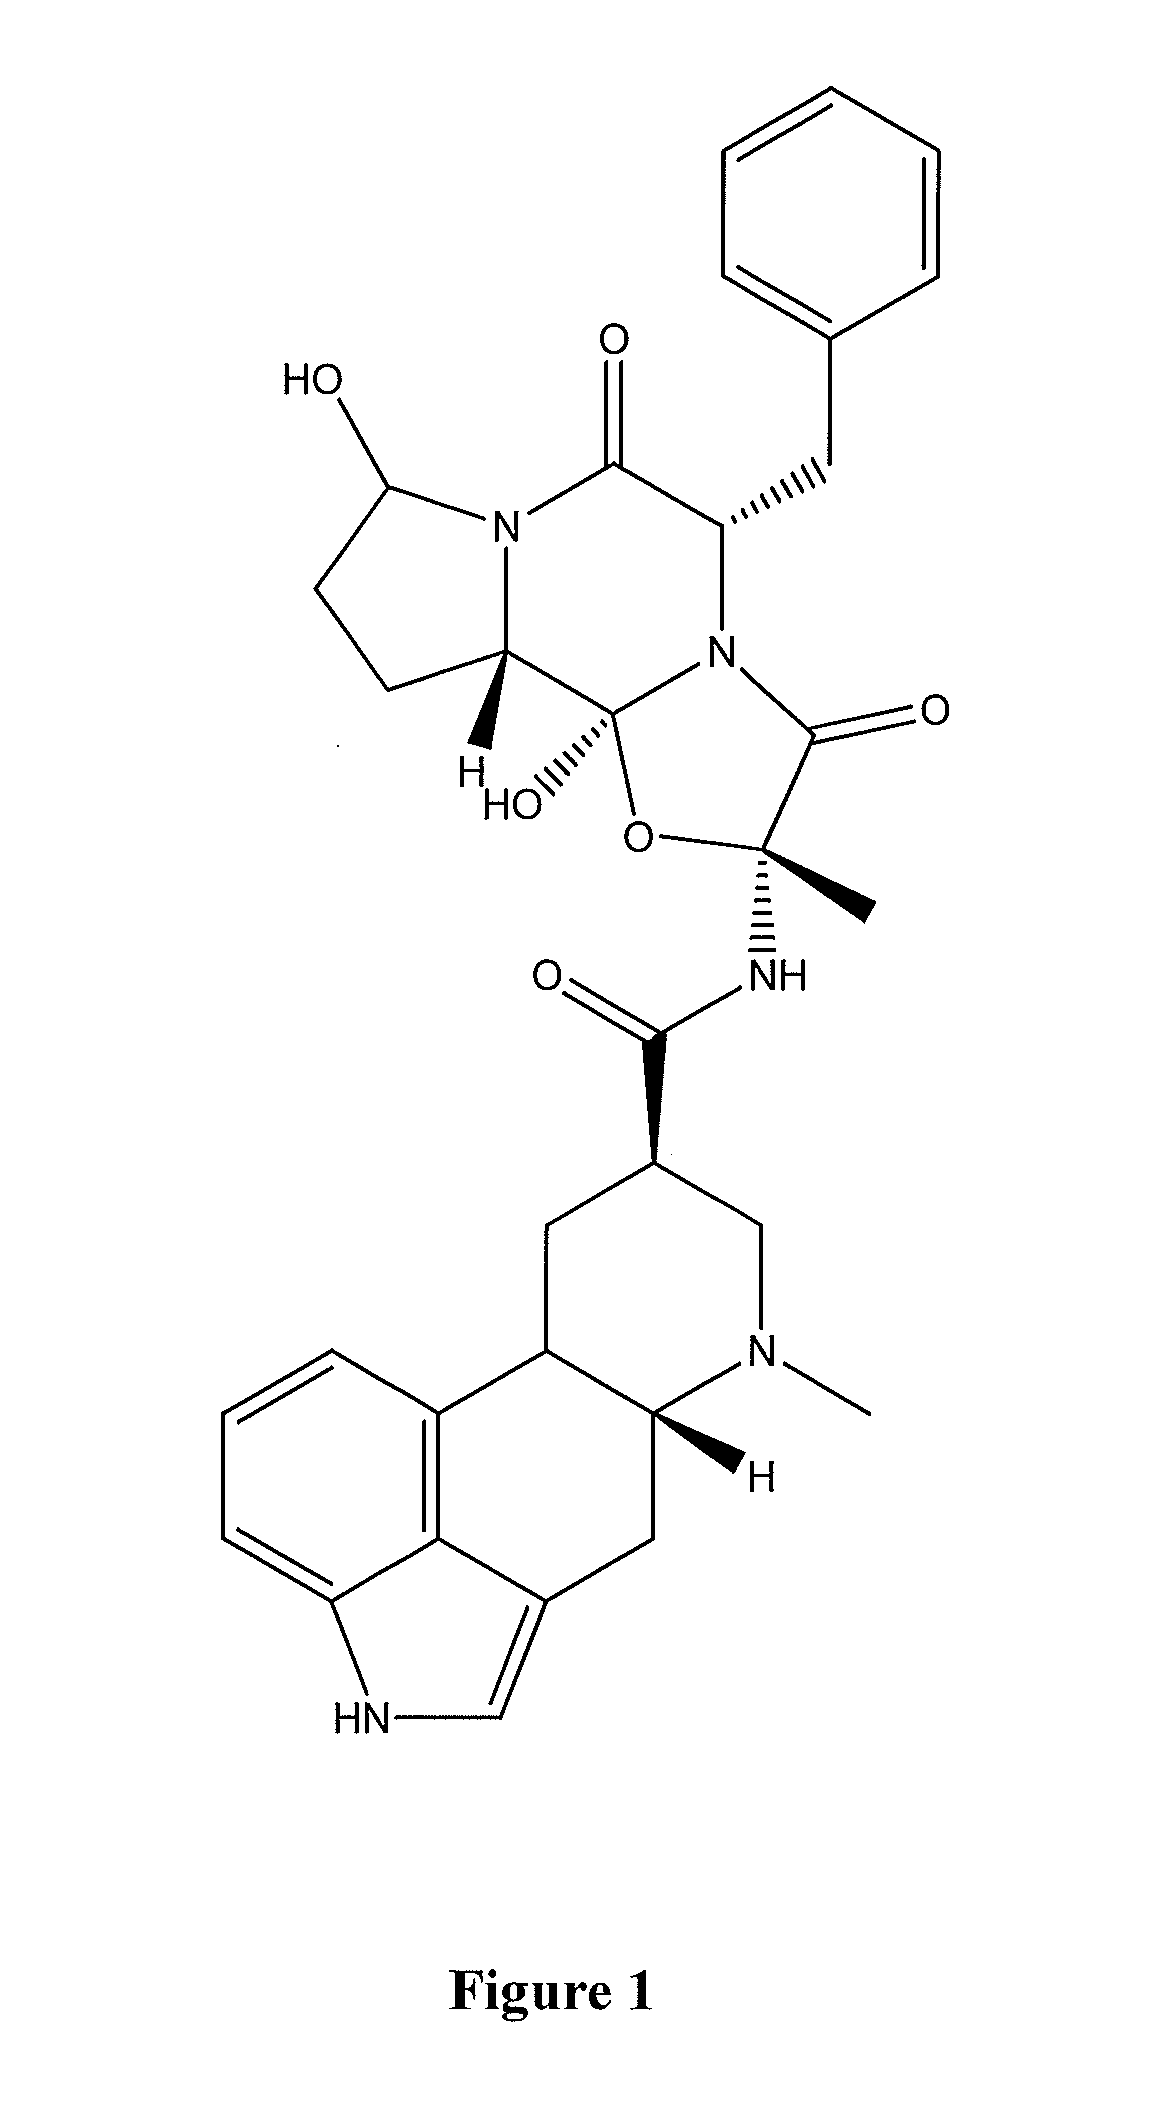 8'-hydroxy-dihydroergotamine compounds and compositions